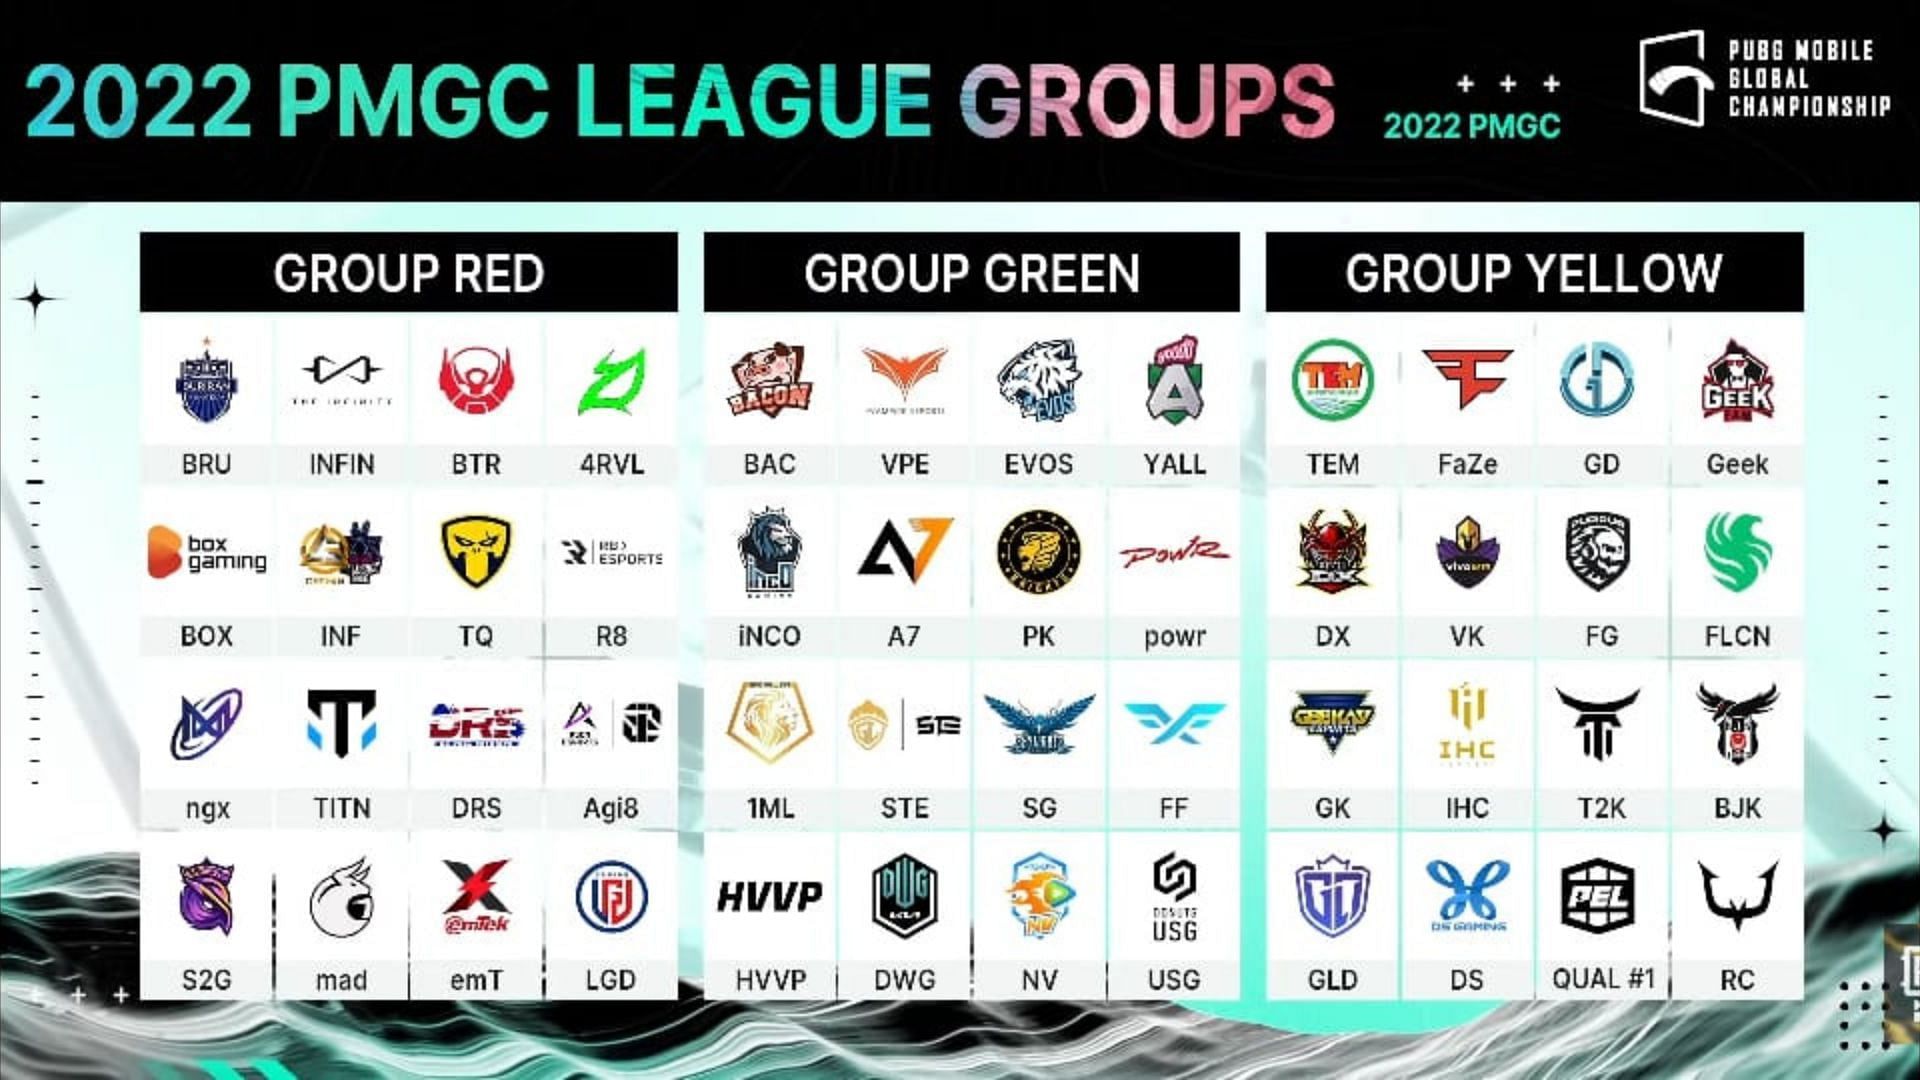 PMGC League Stage Groups and teams (Image via PUBG Mobile)